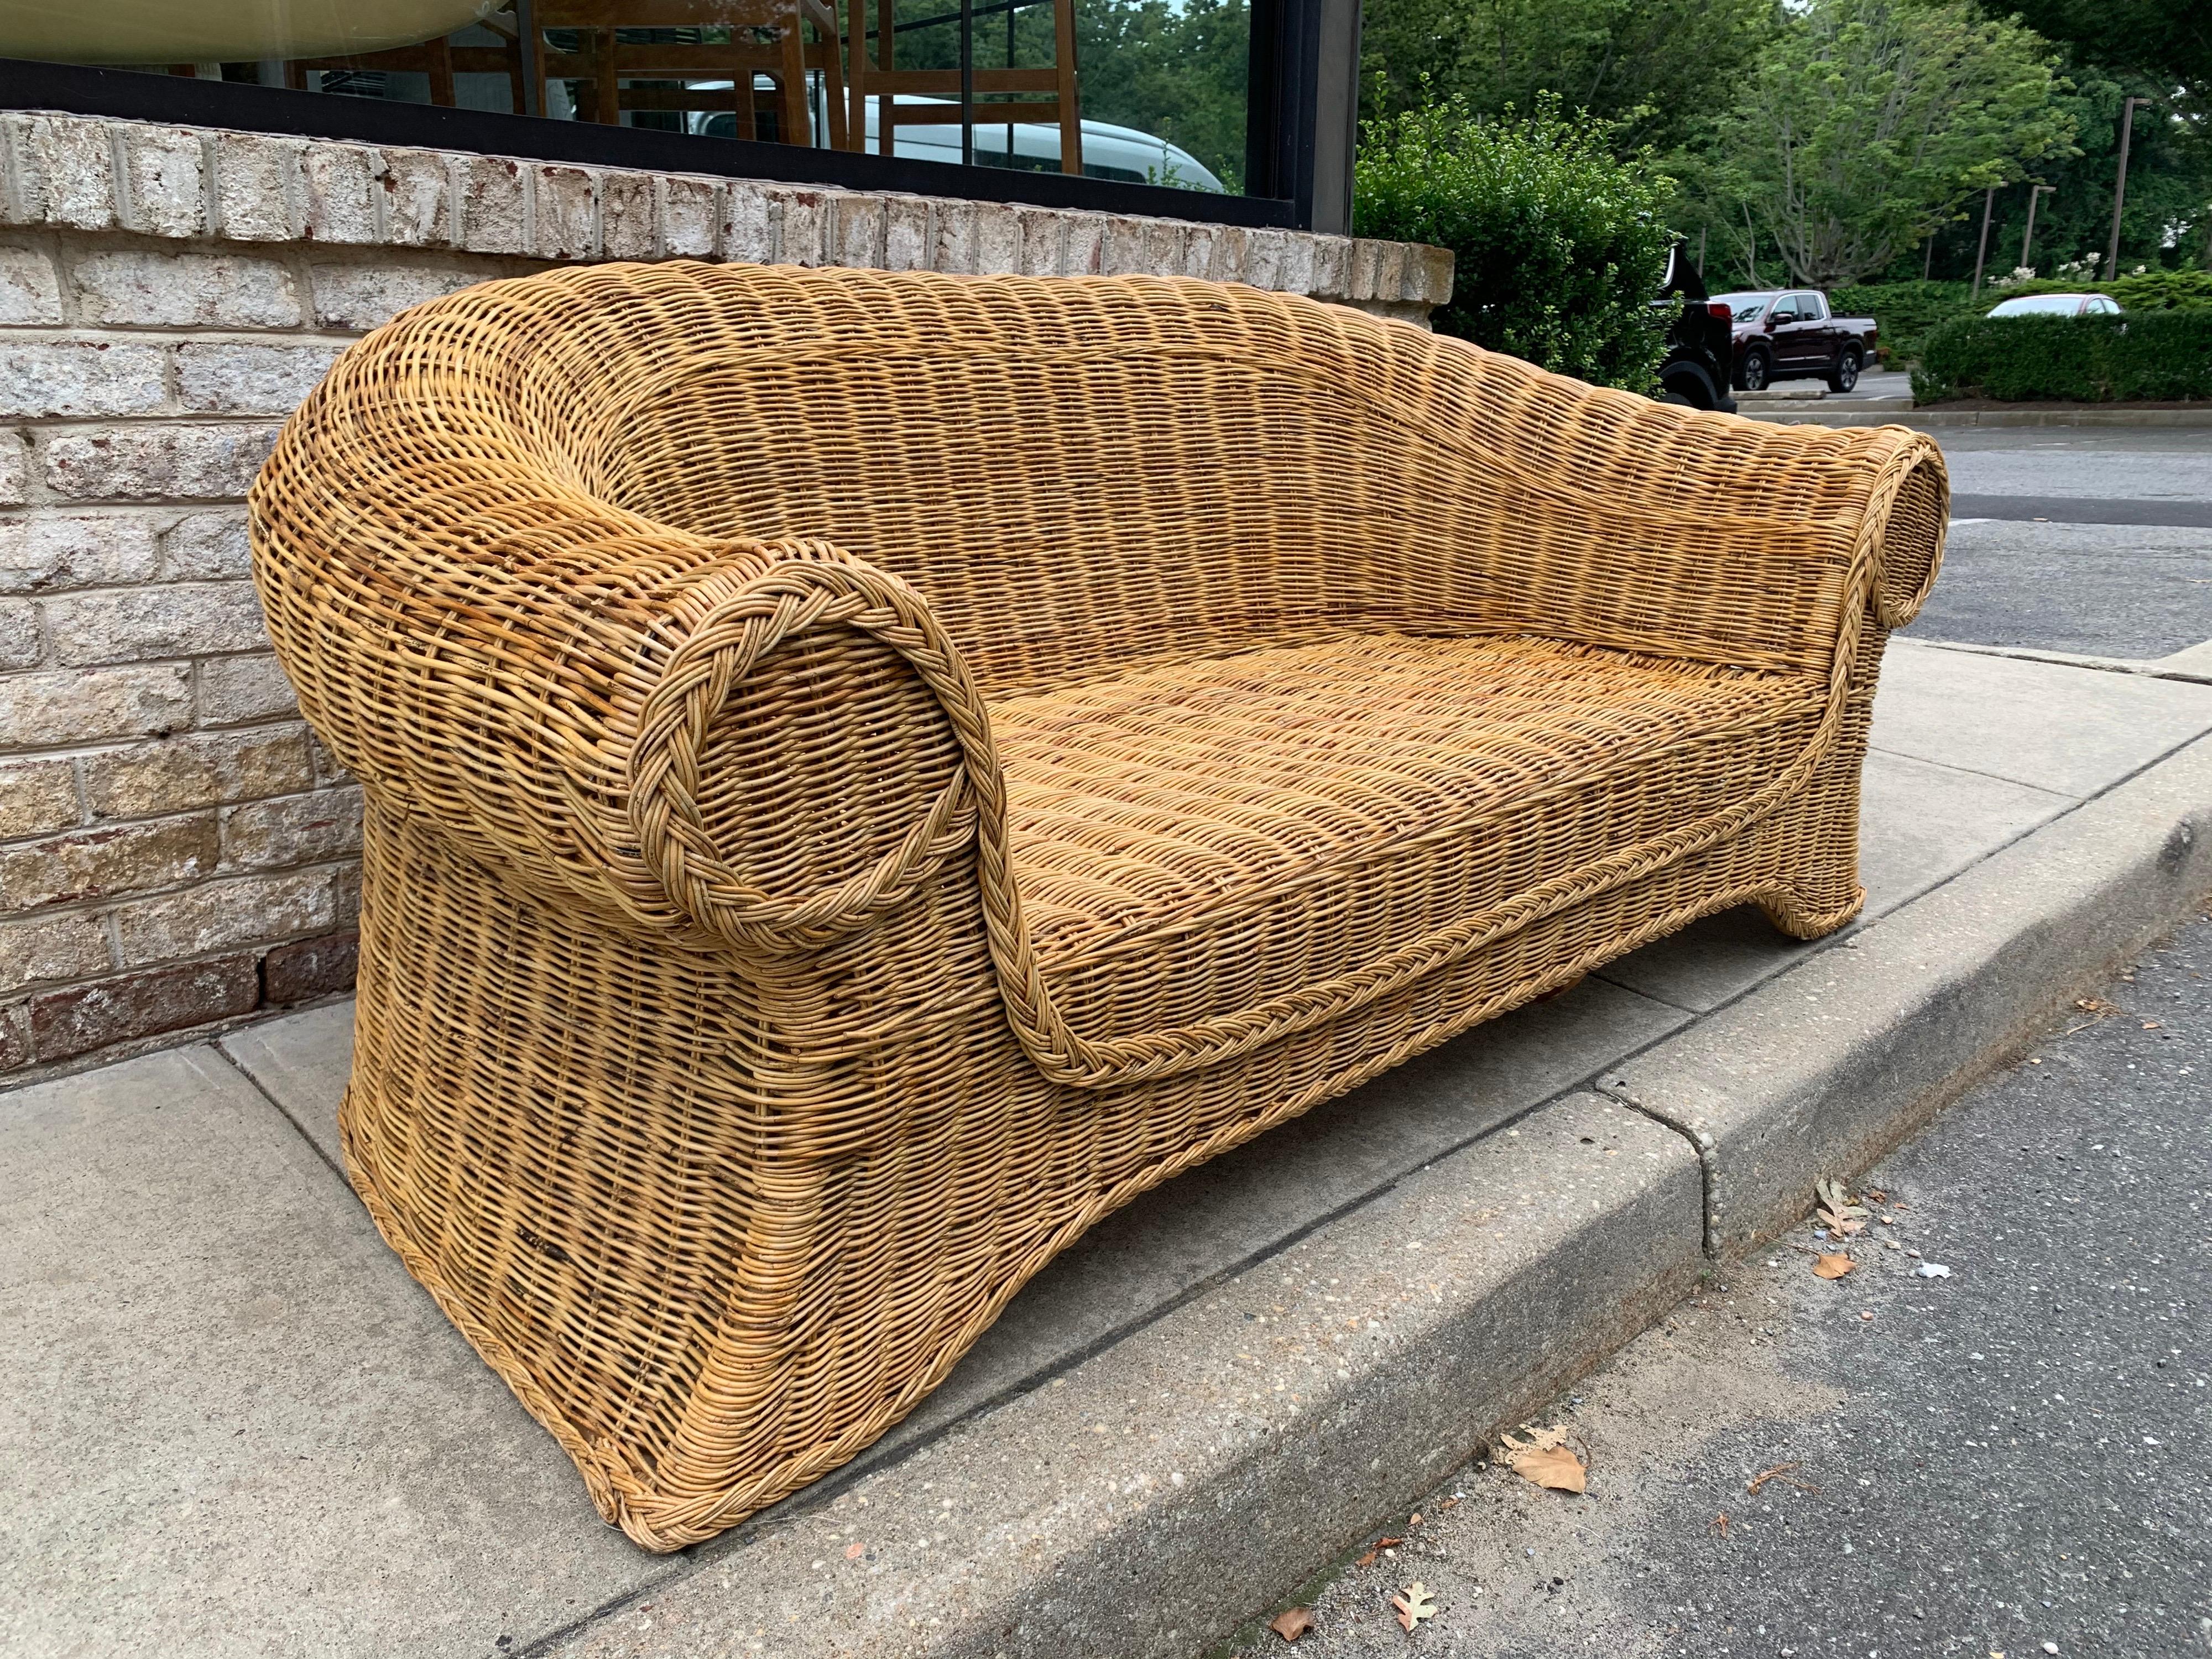 This wonderful piece is in fantastic condition, with a deep and wide seating space. Seat cushion included (as shown) but can be reupholstered if desired. 

Note: Interior dimensions 28 deep, 52 wide.